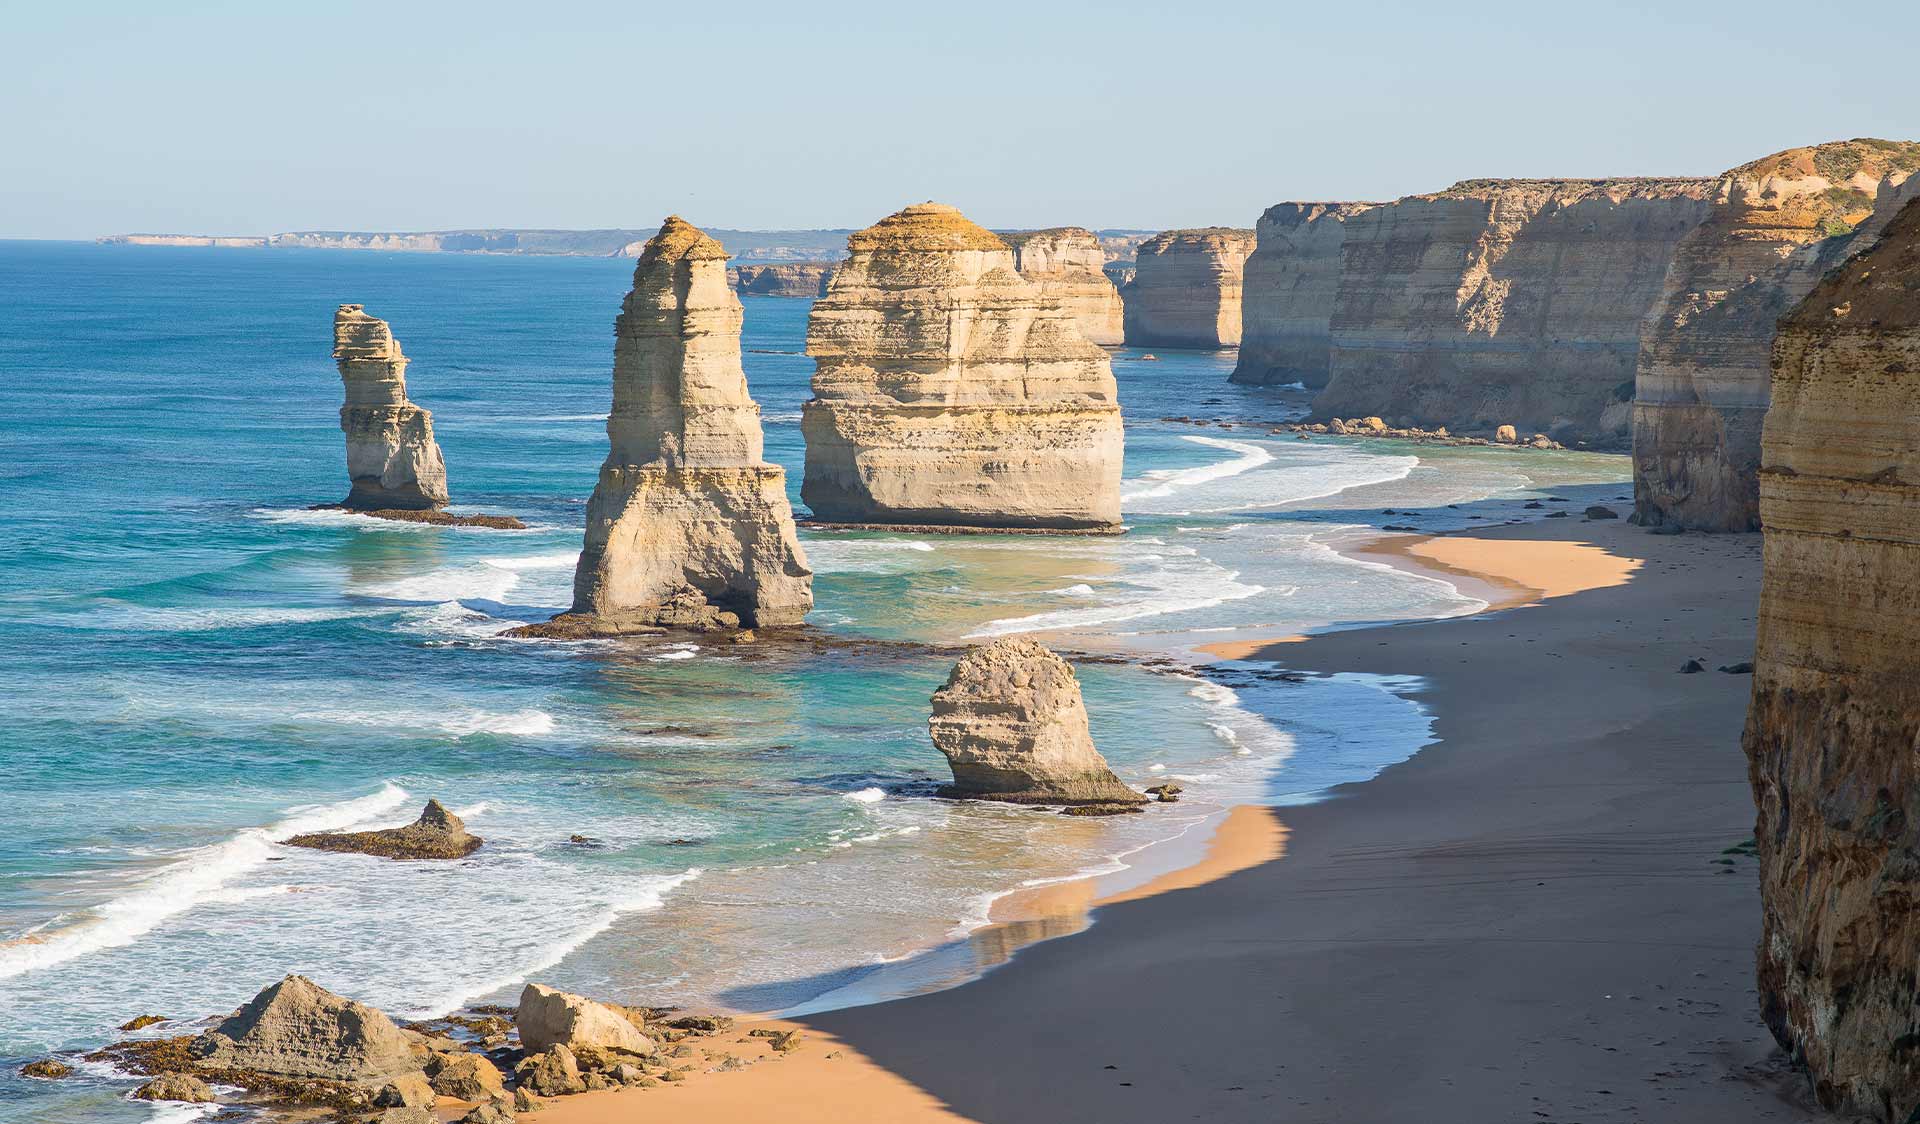 Even If You Don’t Know Much About Geography, Play This World Landmarks Quiz Anyway The 12 Apostles, Twelve Apostles, Australia